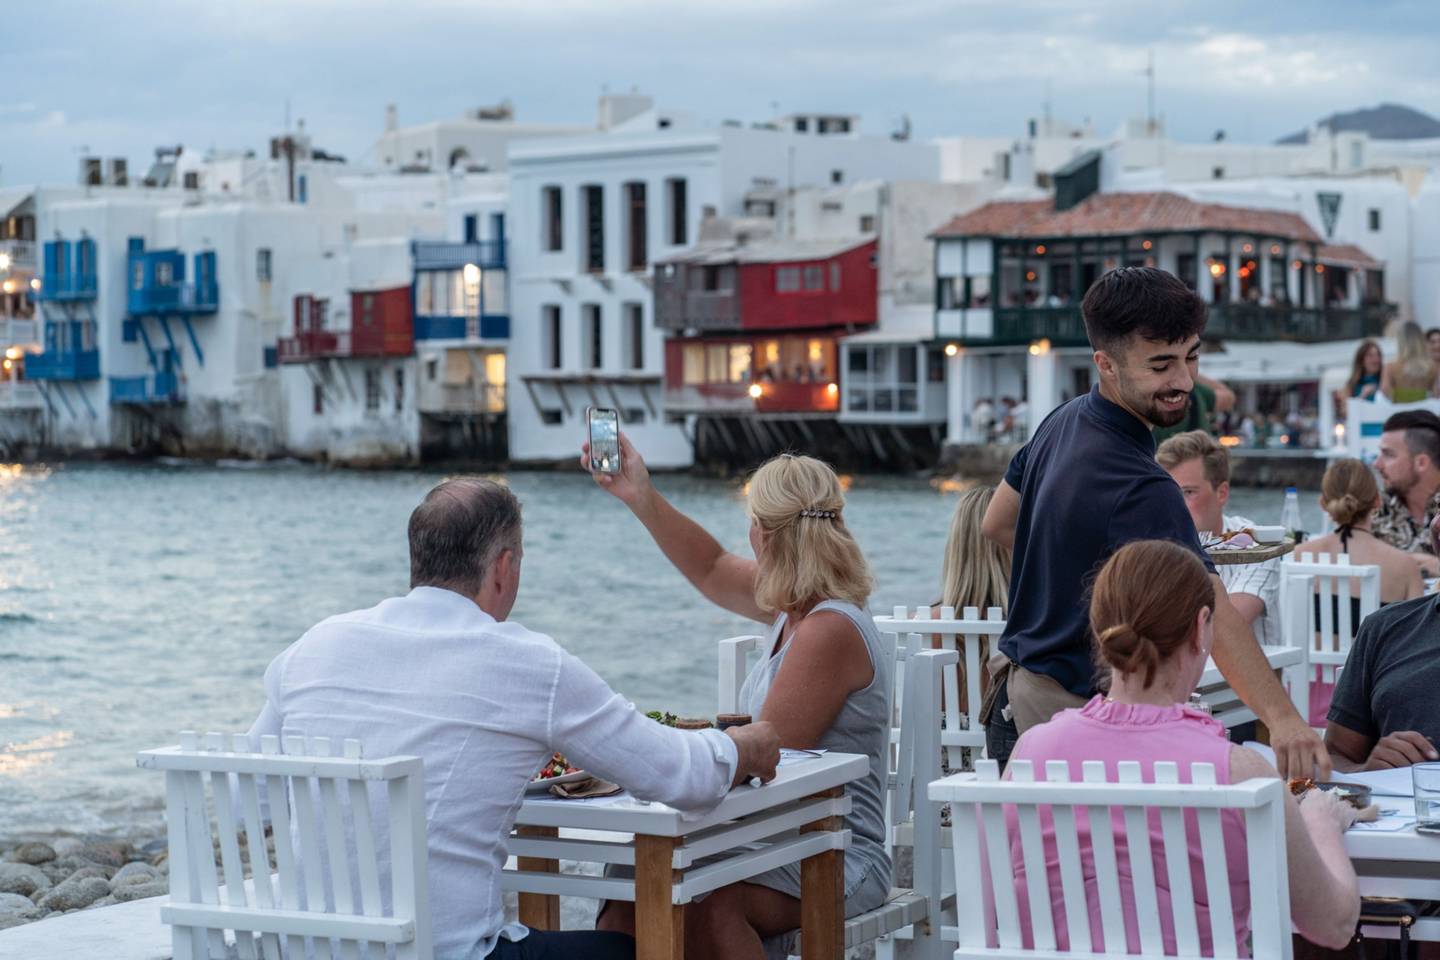 The Greek islands have seen a rise in the number of tourists visiting the country after two years of strict Covid-19 restrictions.dfd